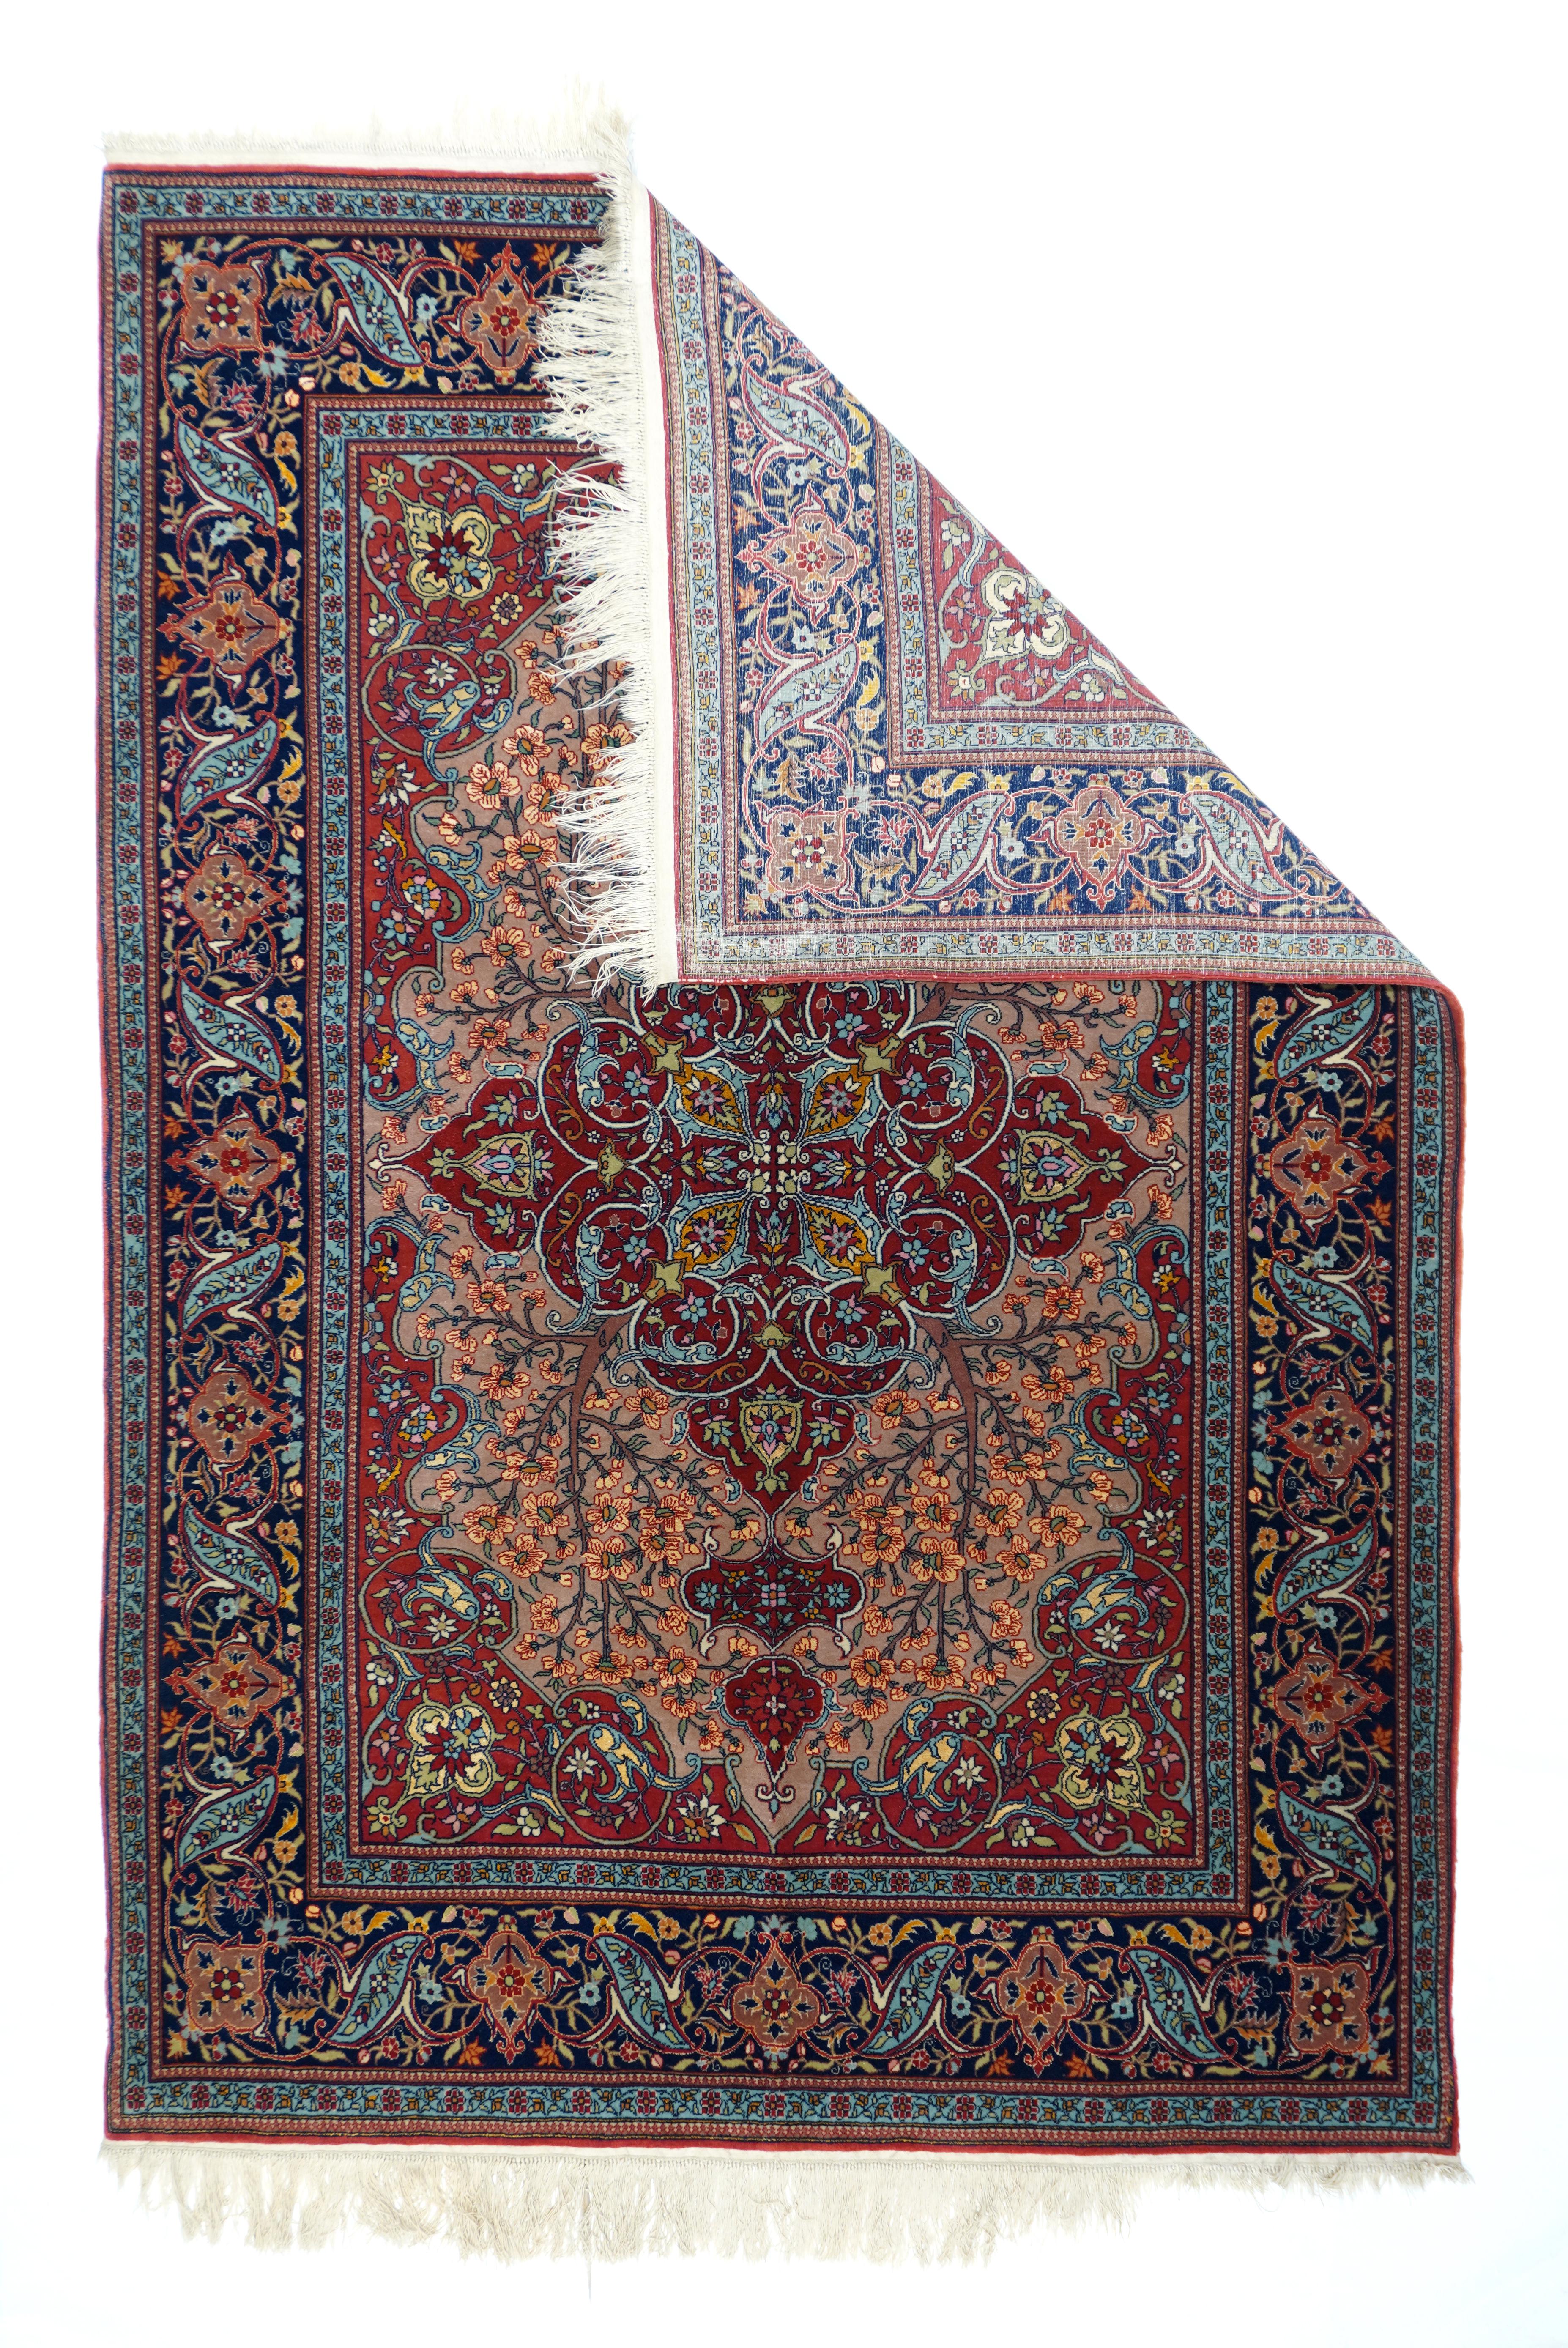 With a composuite wool and silk pile, this very finely woven Turkish medallion scatter woven near Istanbul, shows a red, internally scrolled diamond medallion with double pendants of cartouche and quadrilobe forms. Green field with four flowering